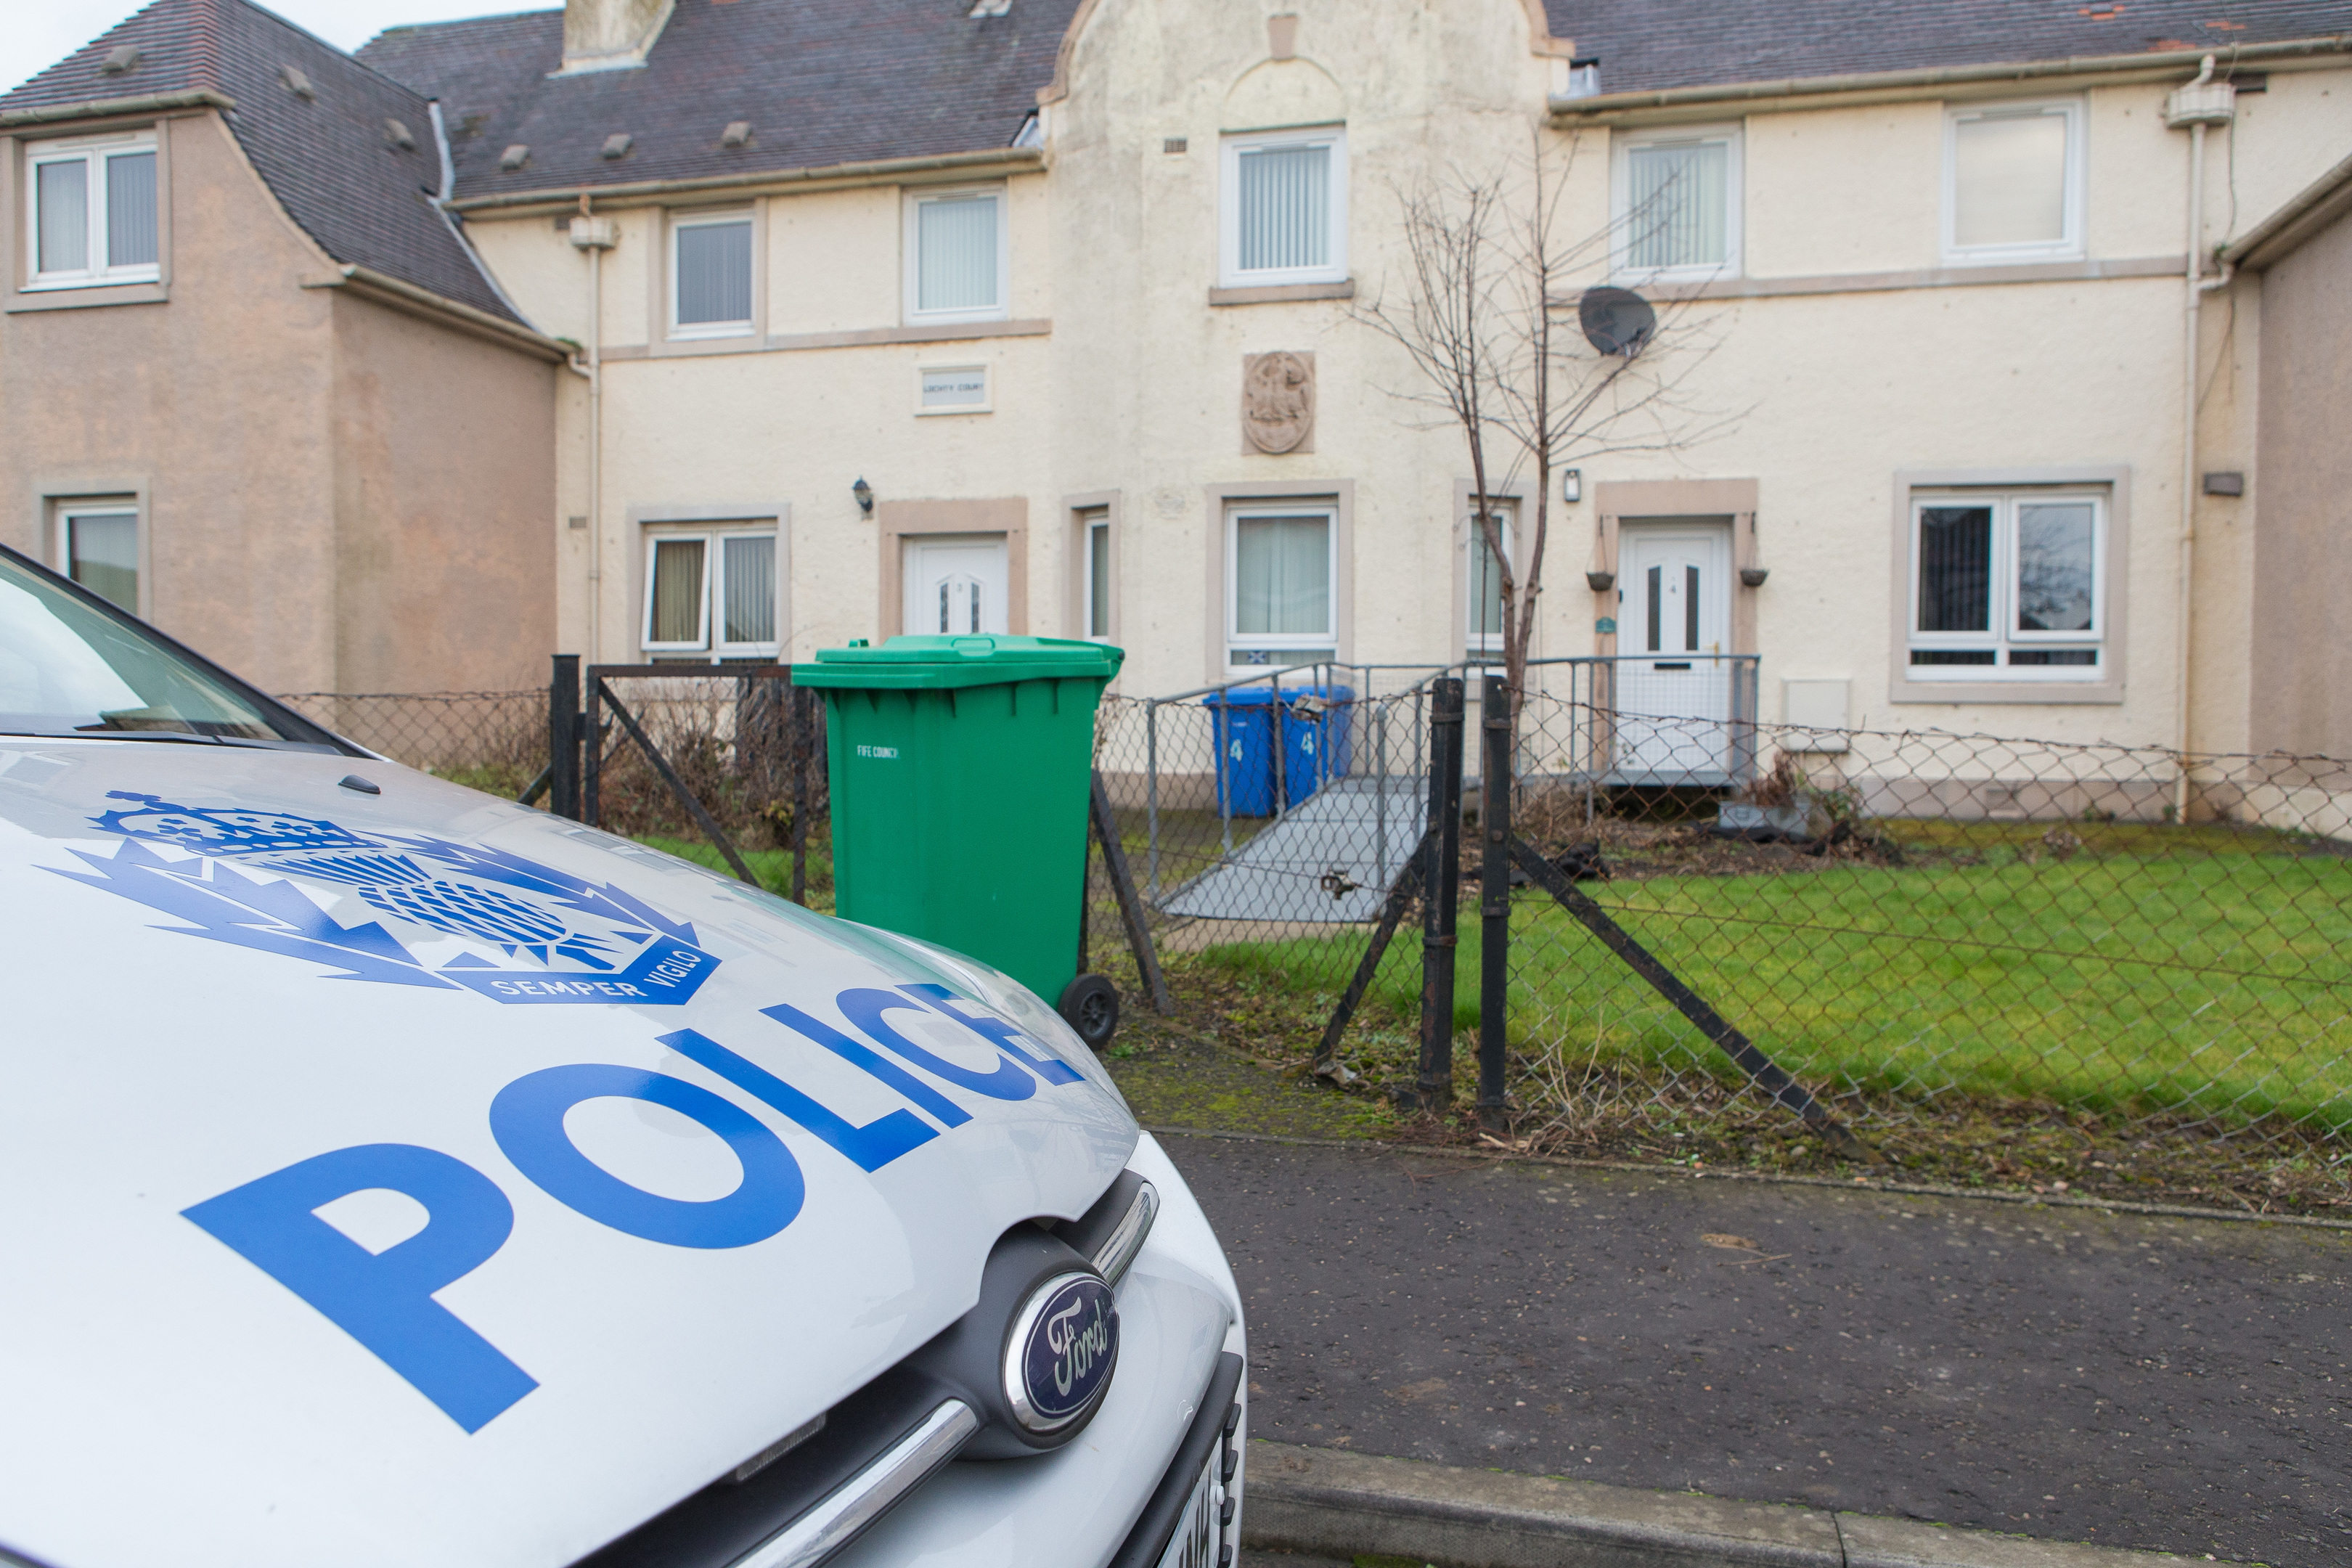 Police remain at the Thornton flat where the 39-year-old woman died